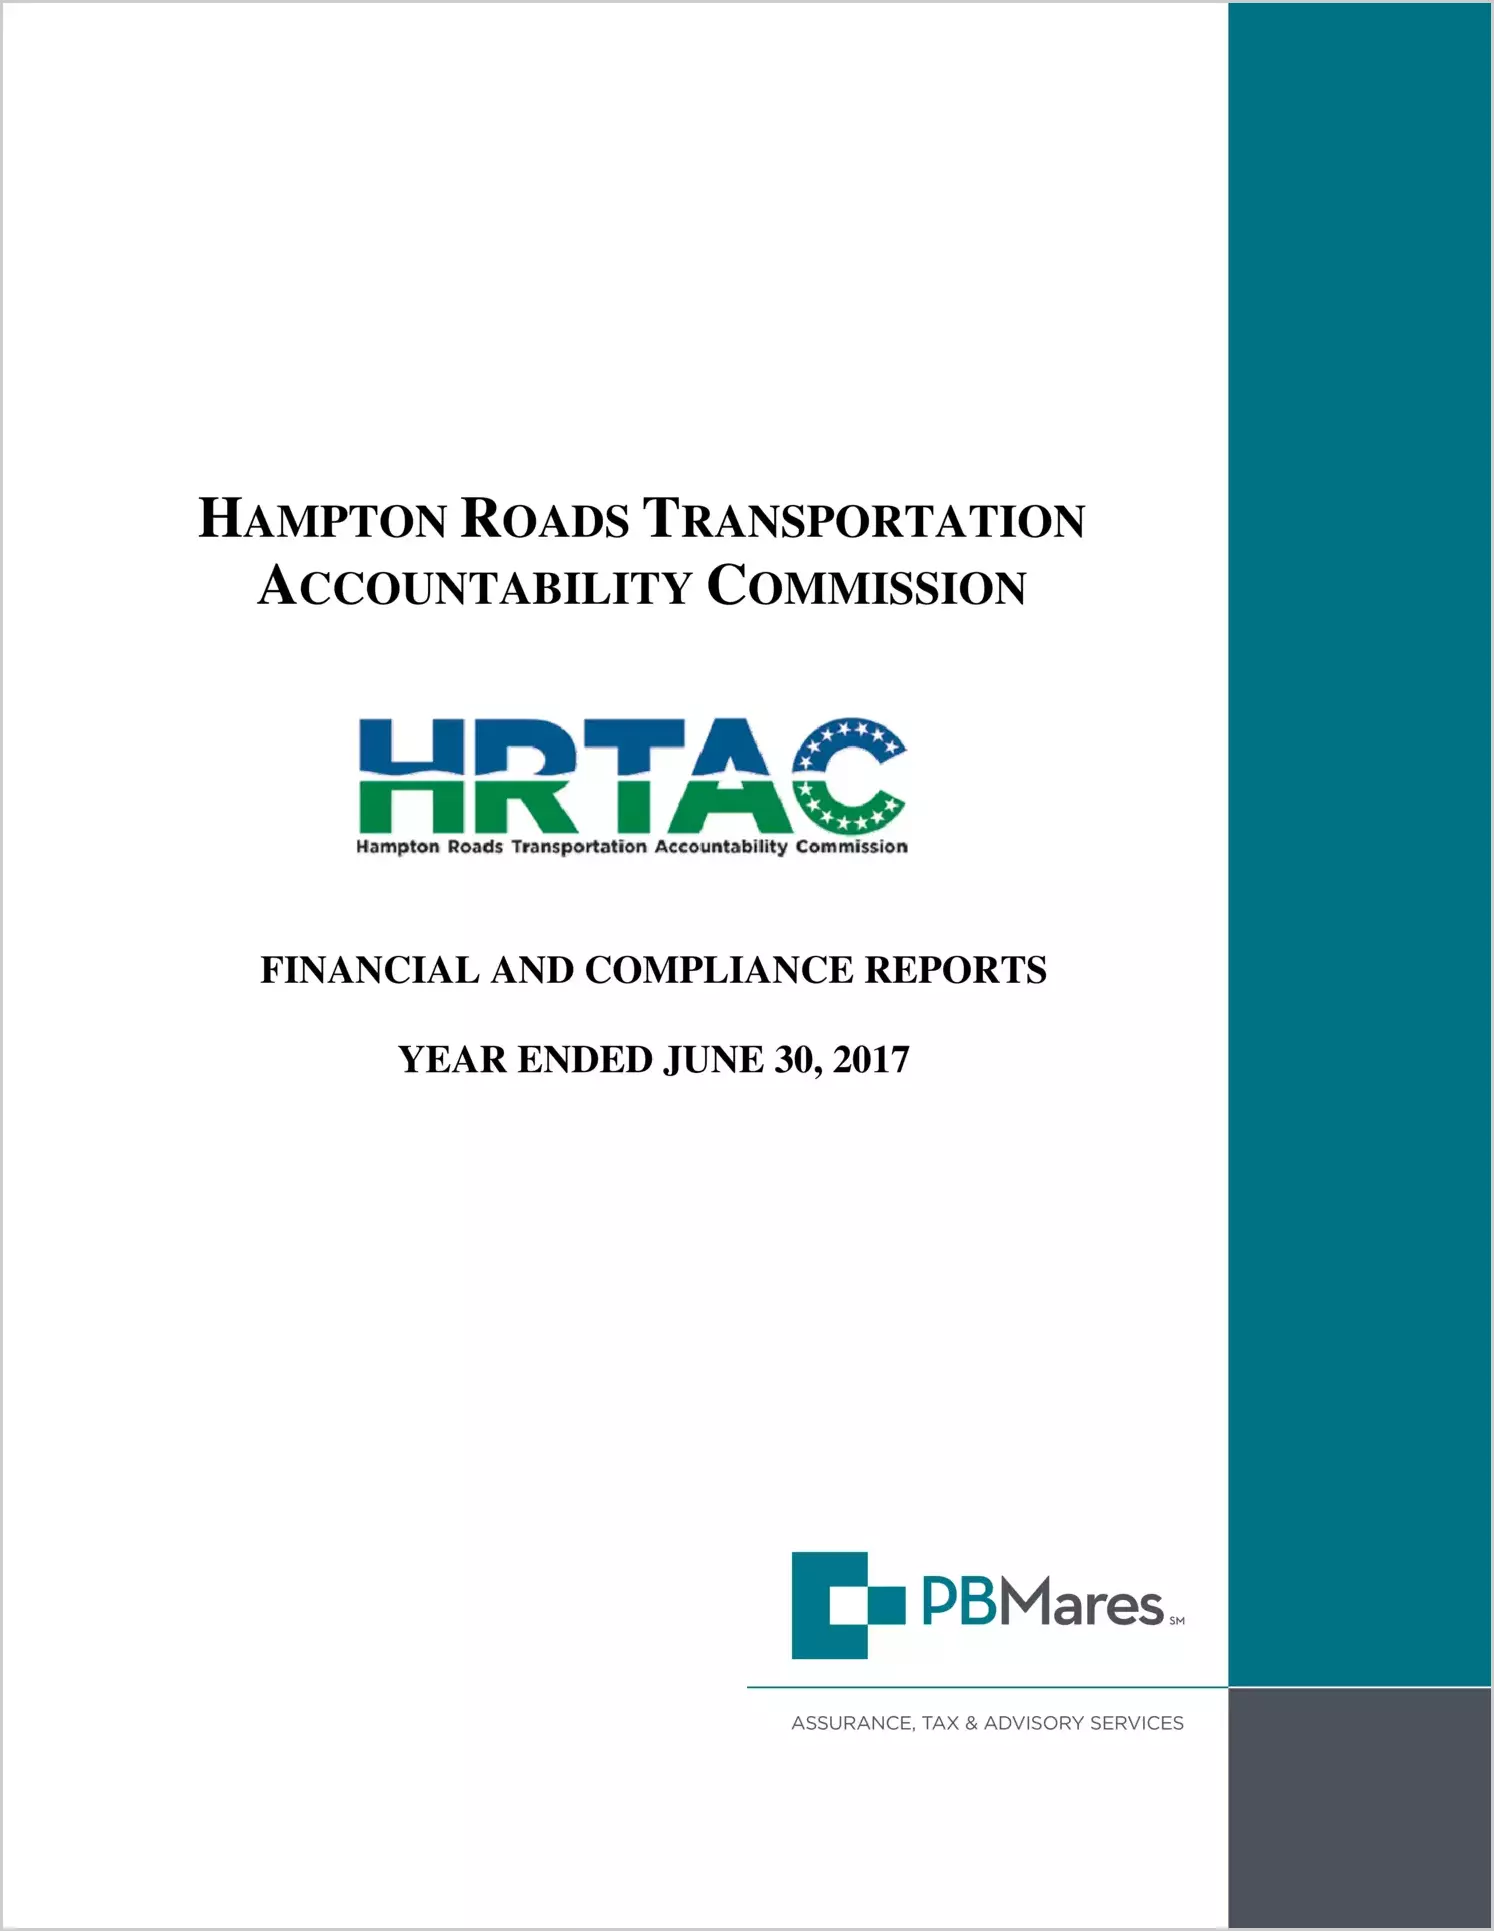 Hampton Roads Transportation Accountability Commission for the fiscal year ended June 30, 2017